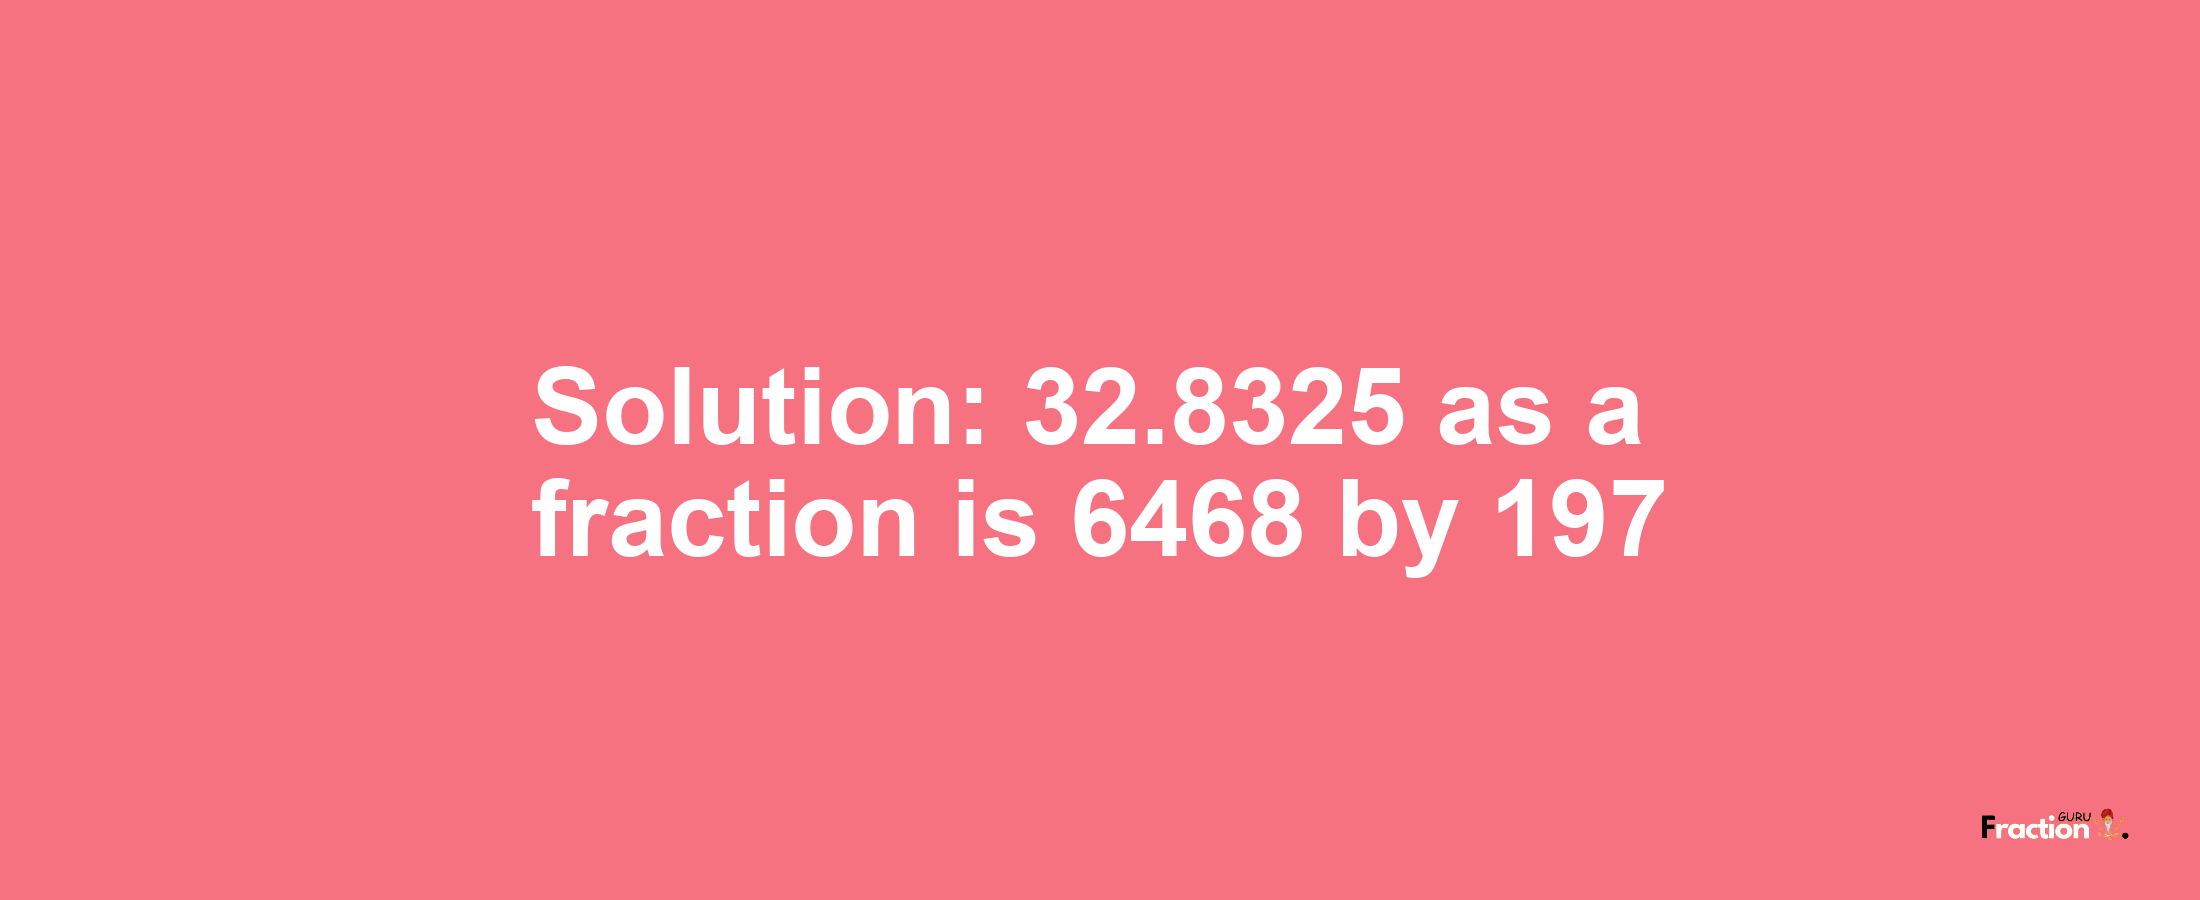 Solution:32.8325 as a fraction is 6468/197